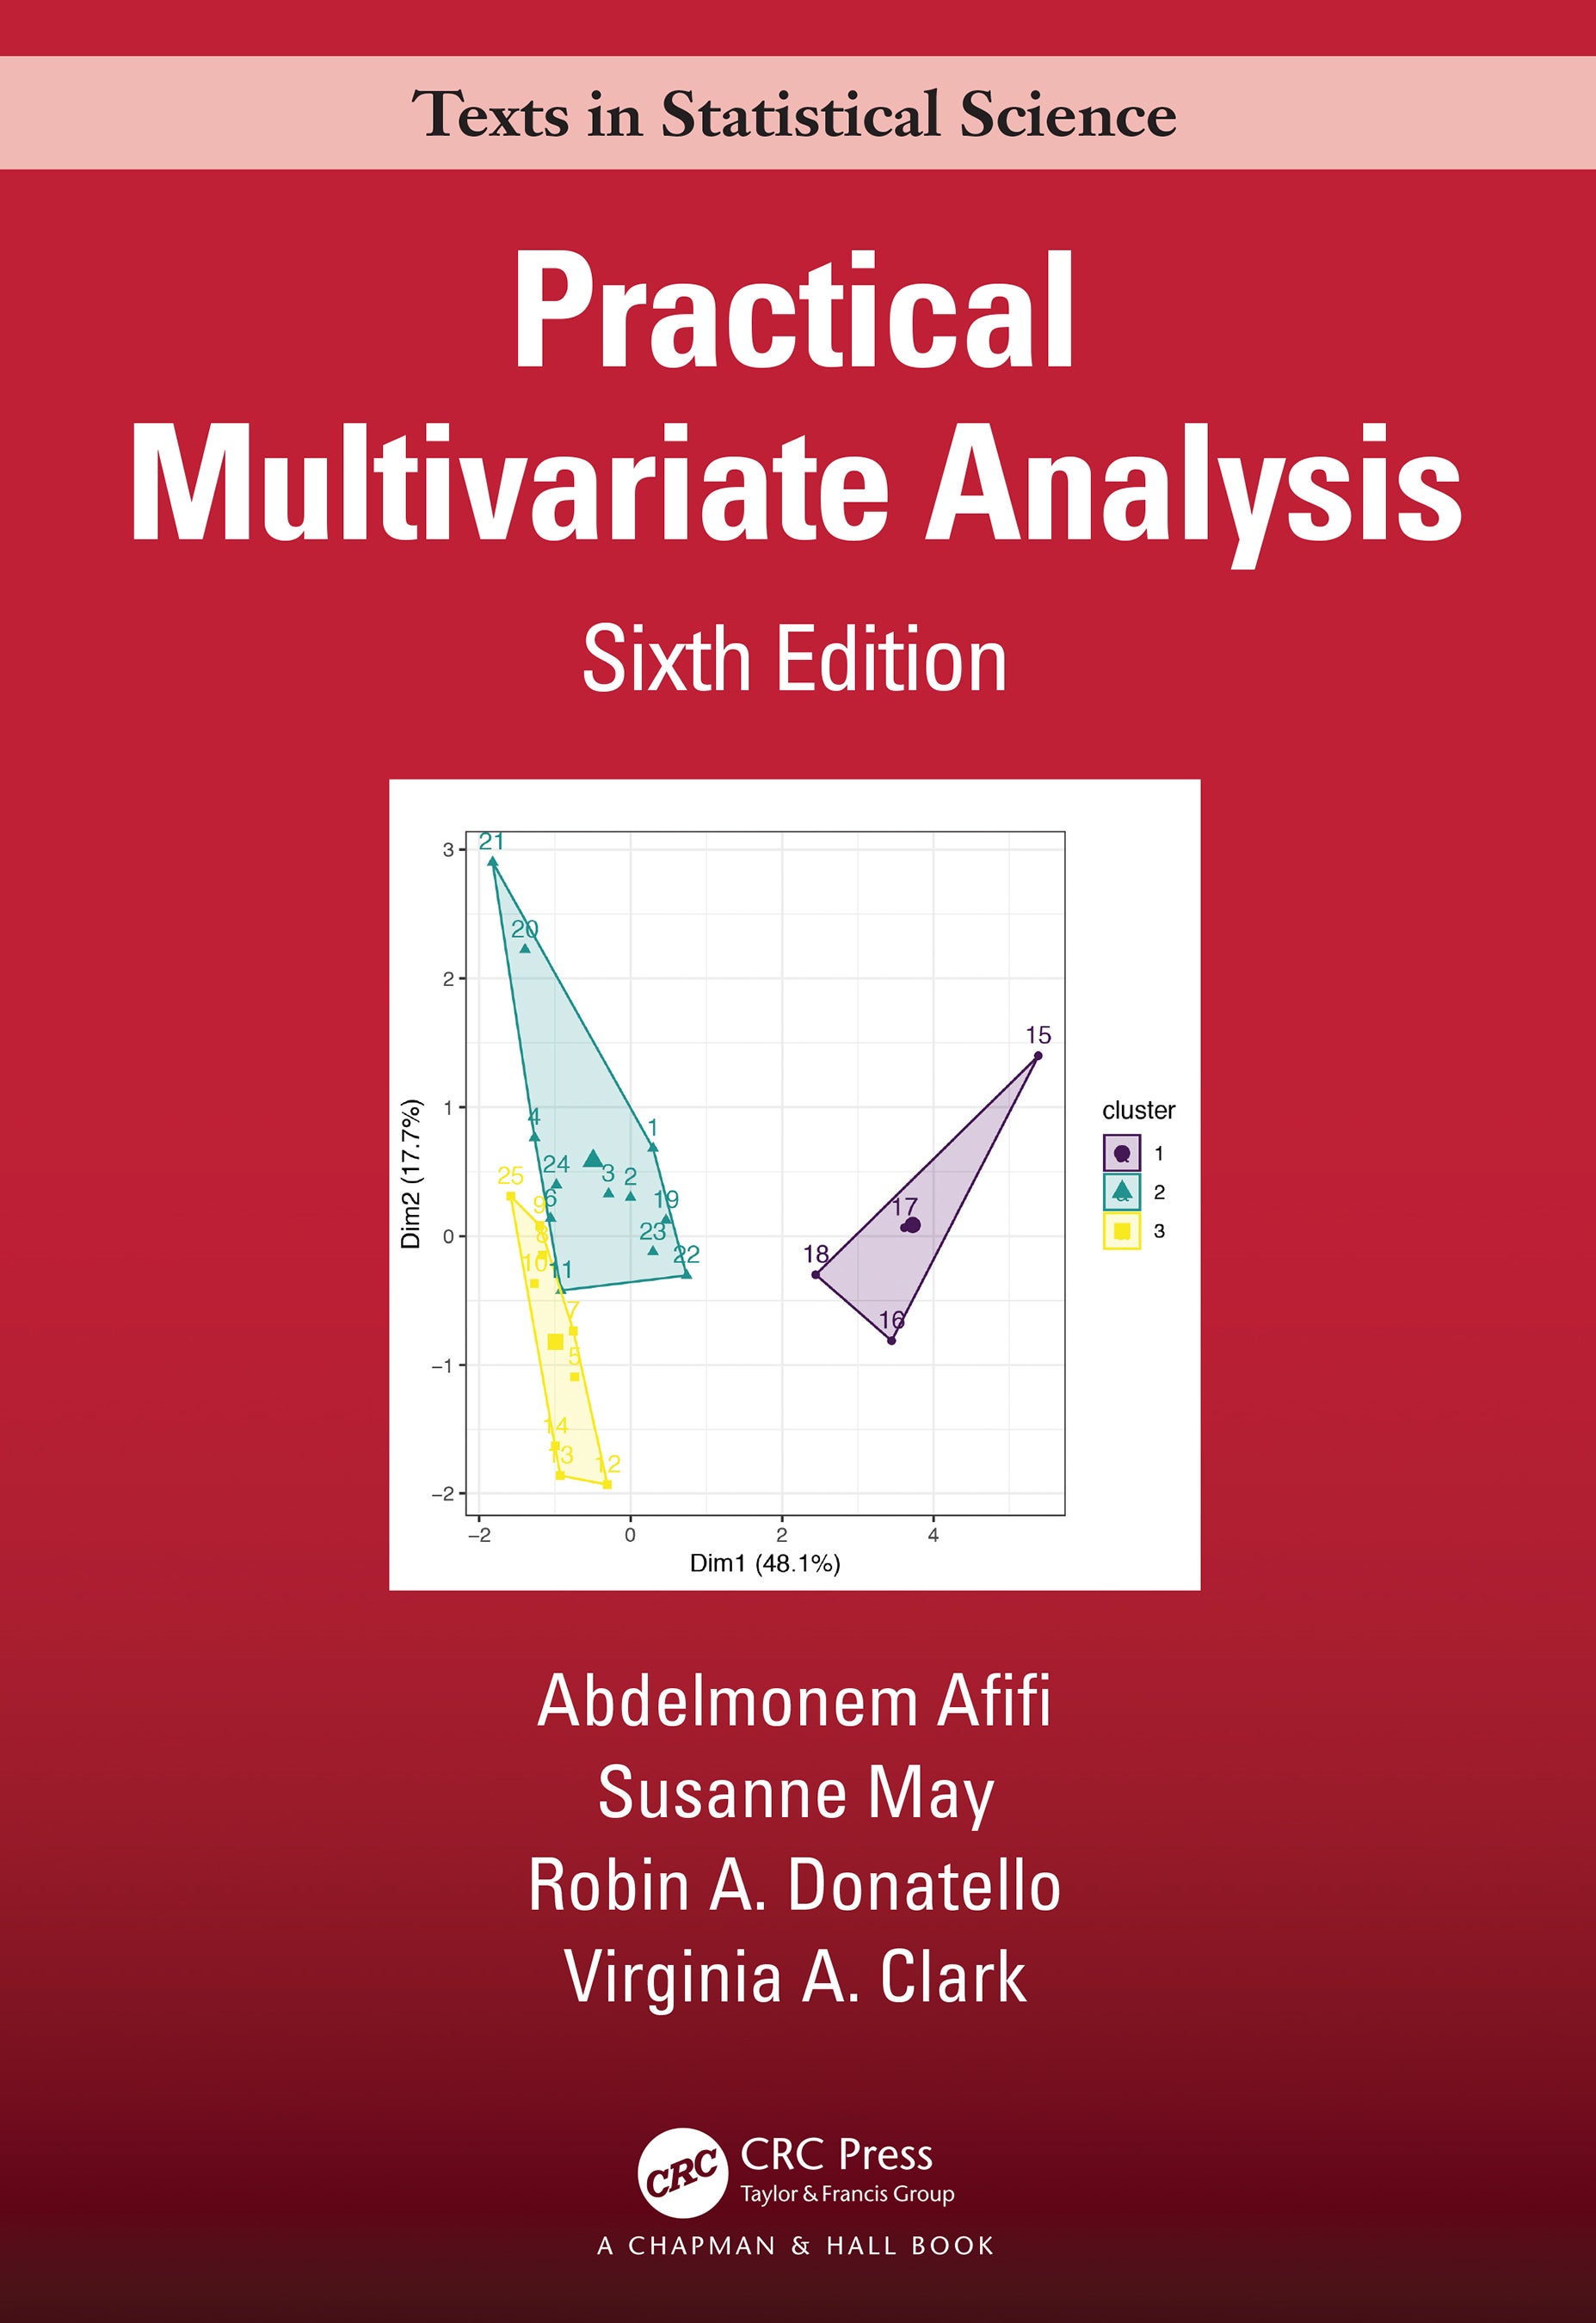 "Practical Multivariate Analysis, Sixth Edition" book cover